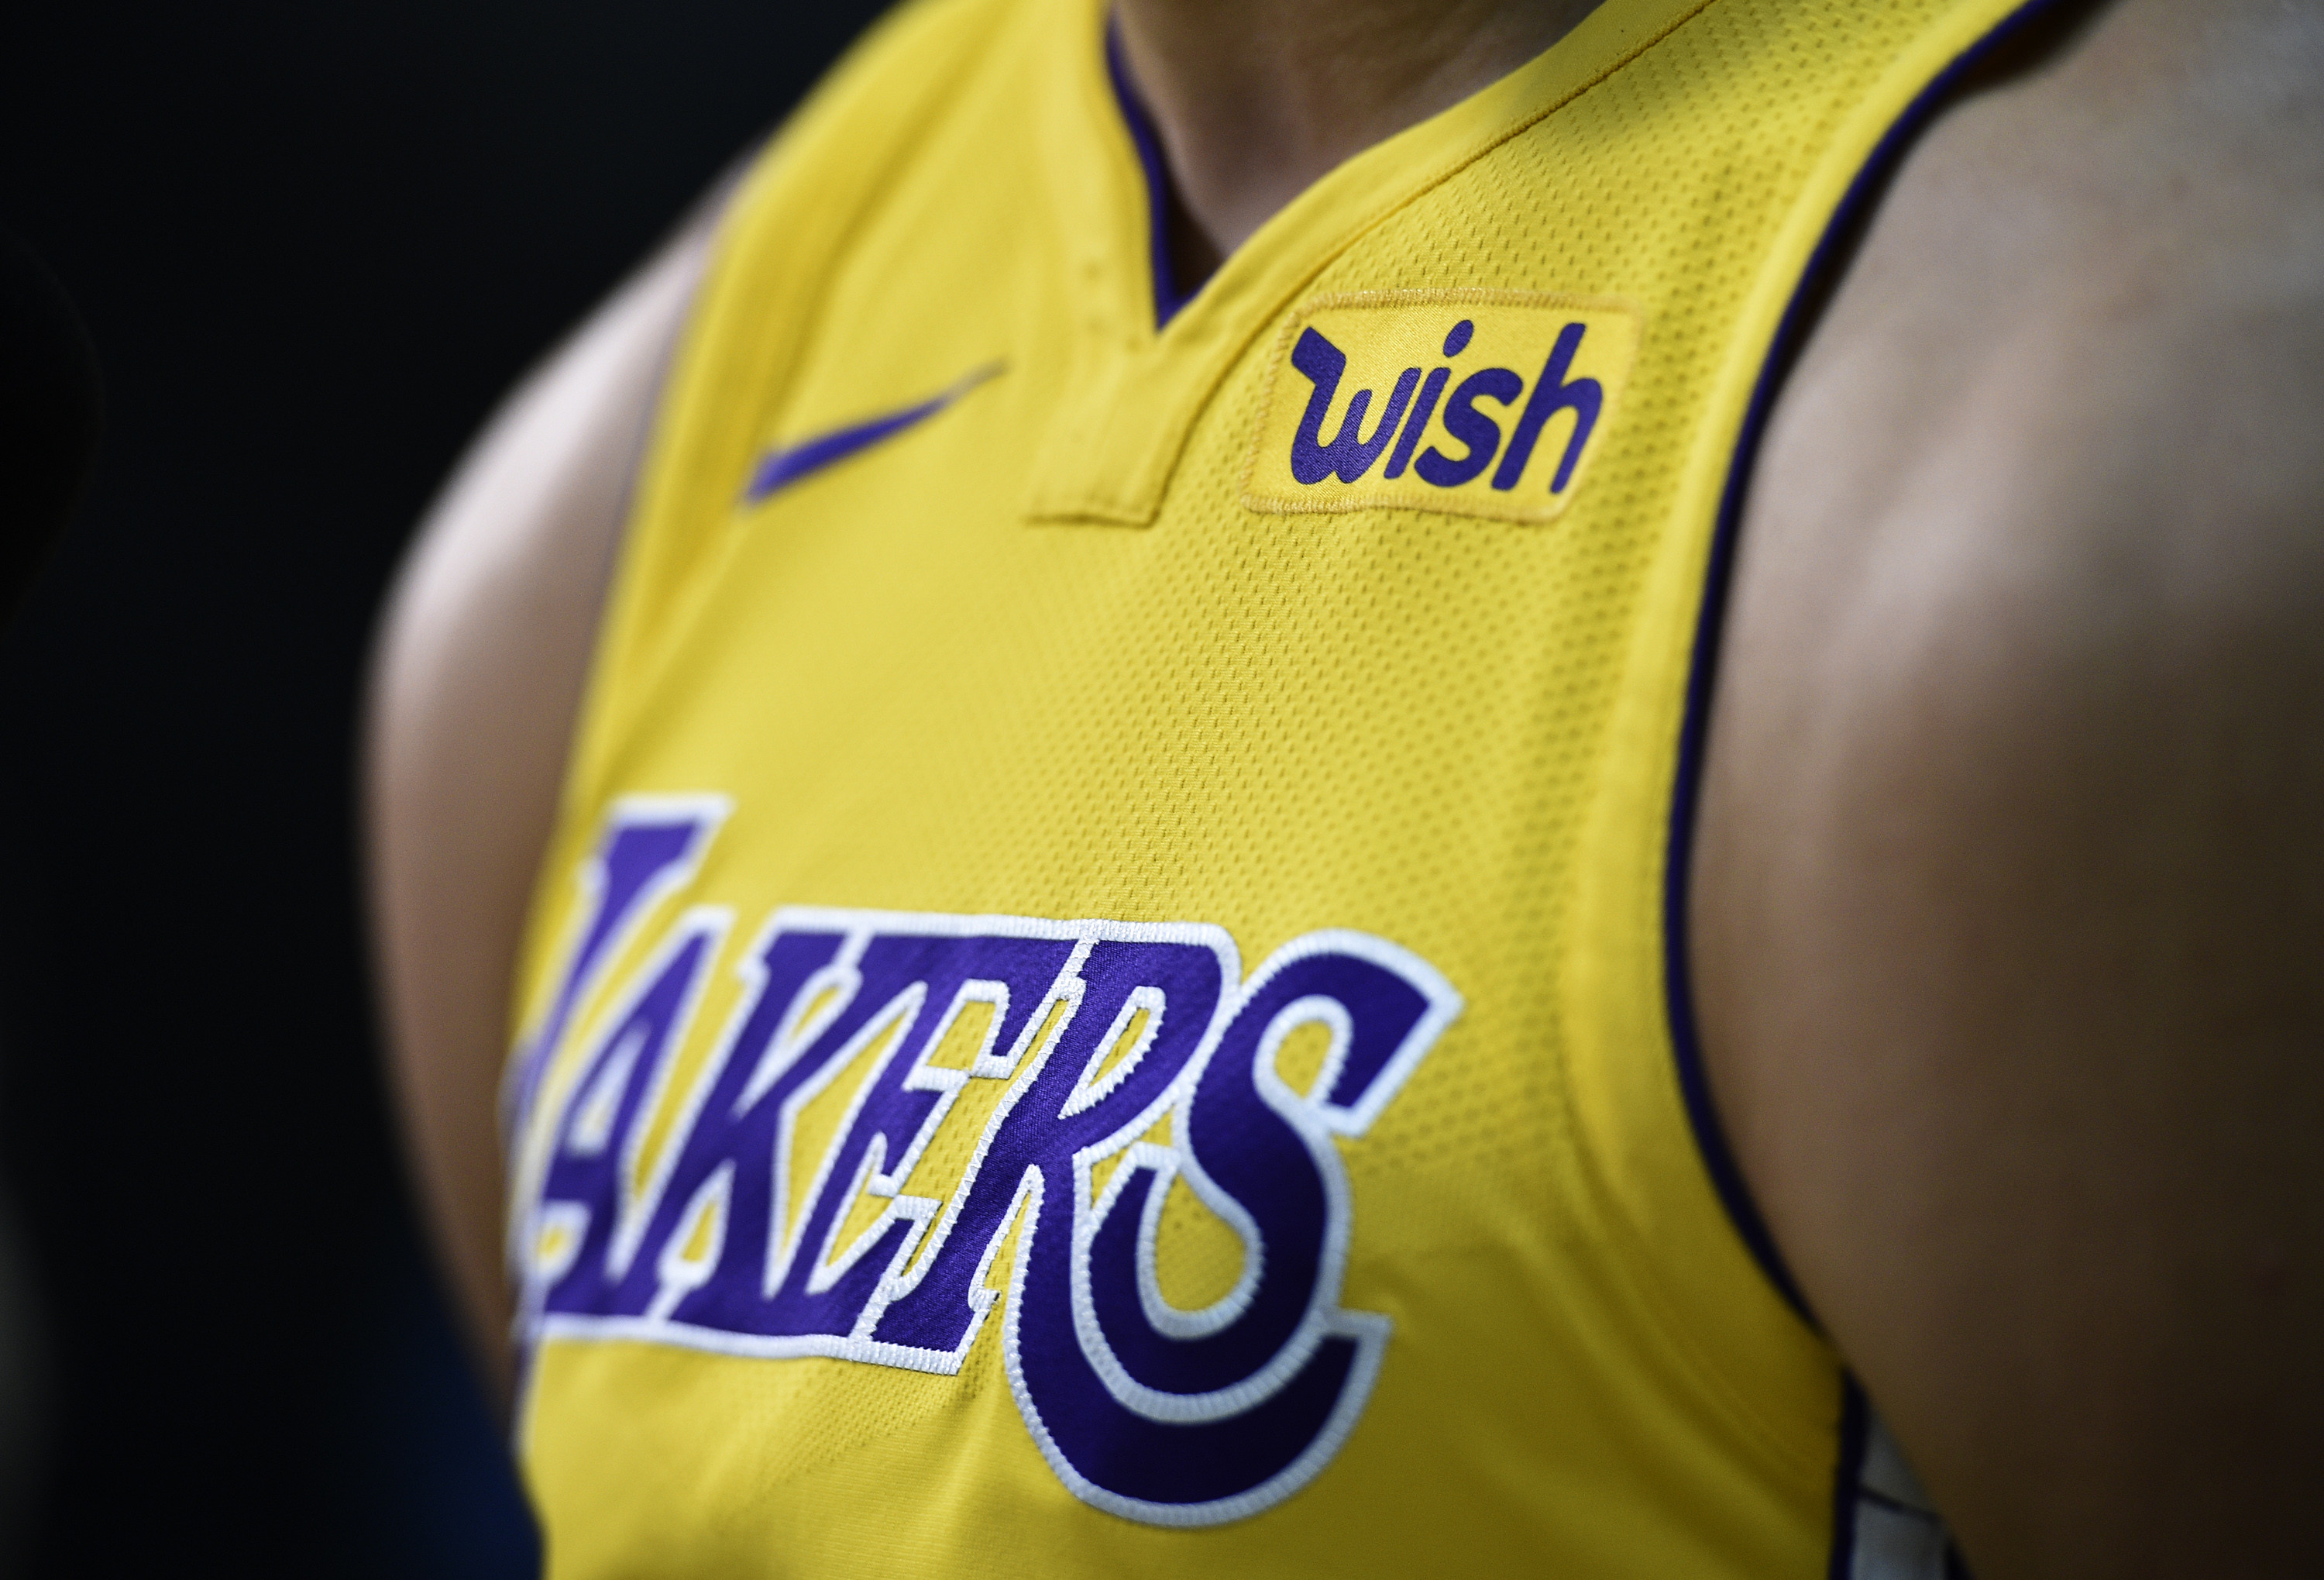 3000x2039 Why the CEO of Wish spent more than $30 million to sponsor the Los Angeles  Lakers' jerseys. “